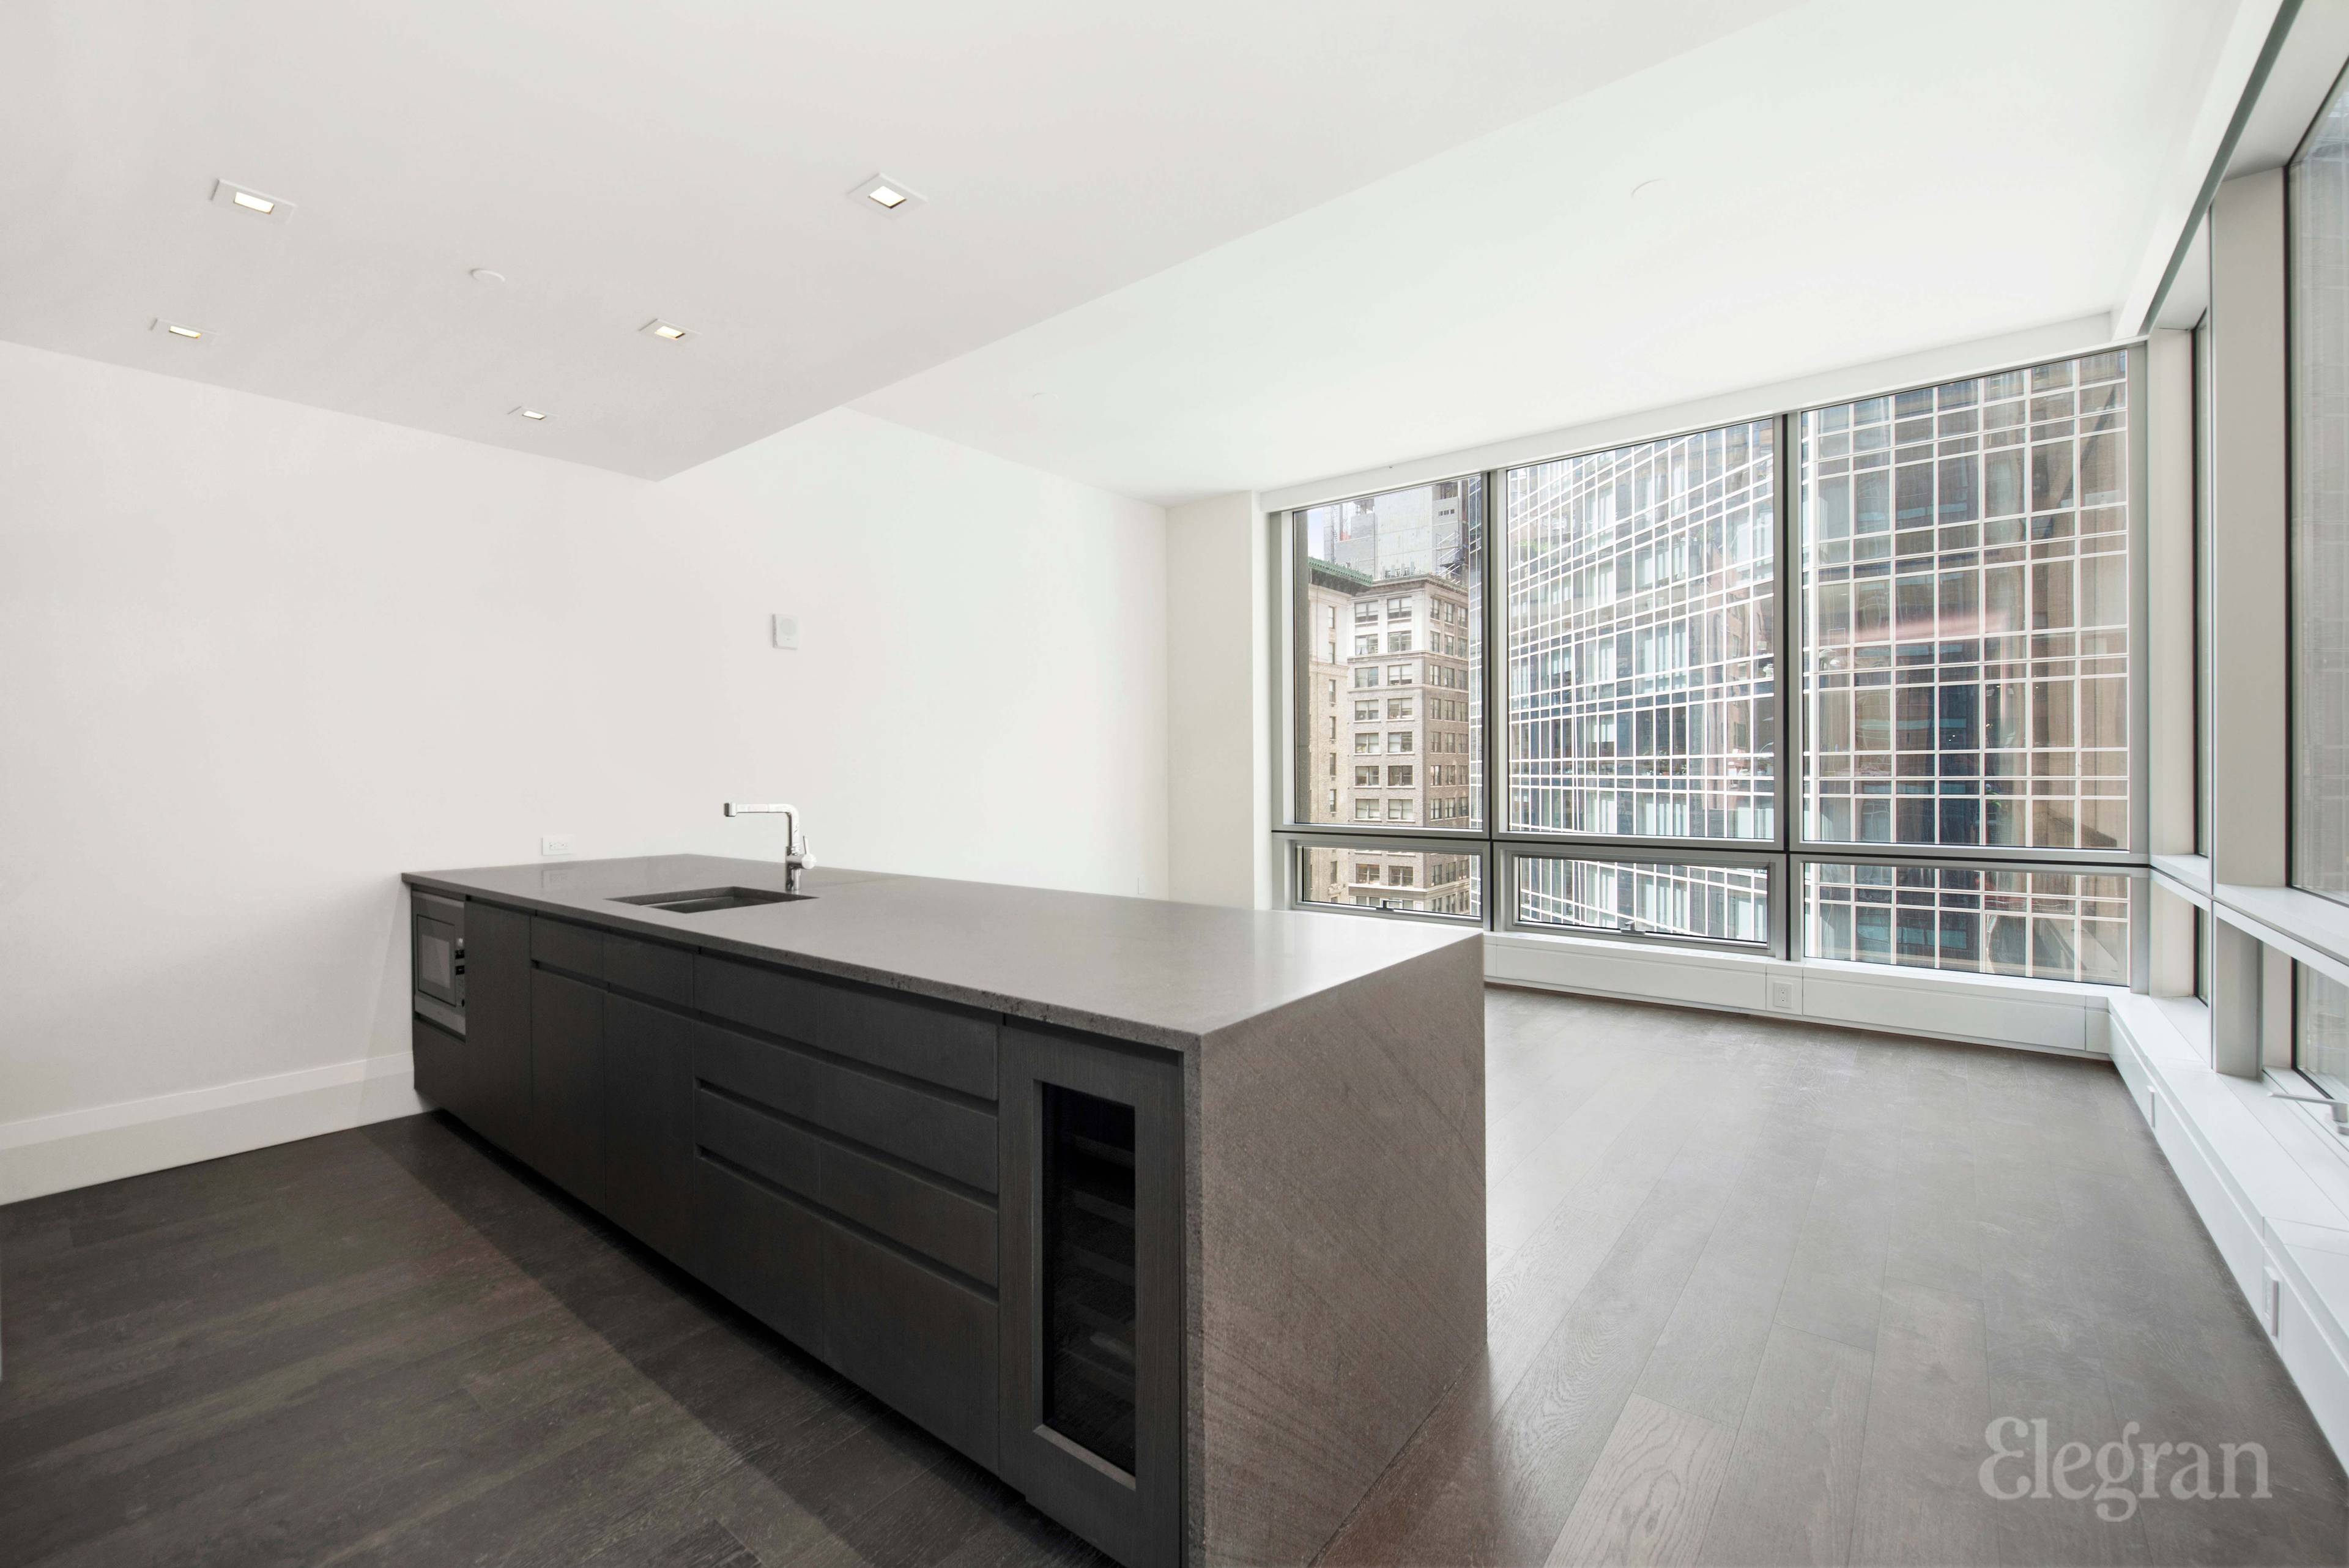 Remarkably spacious one bedroom, one and a half bathroom apartment available for rent on Madison Avenue the largest one bedroom in the building.